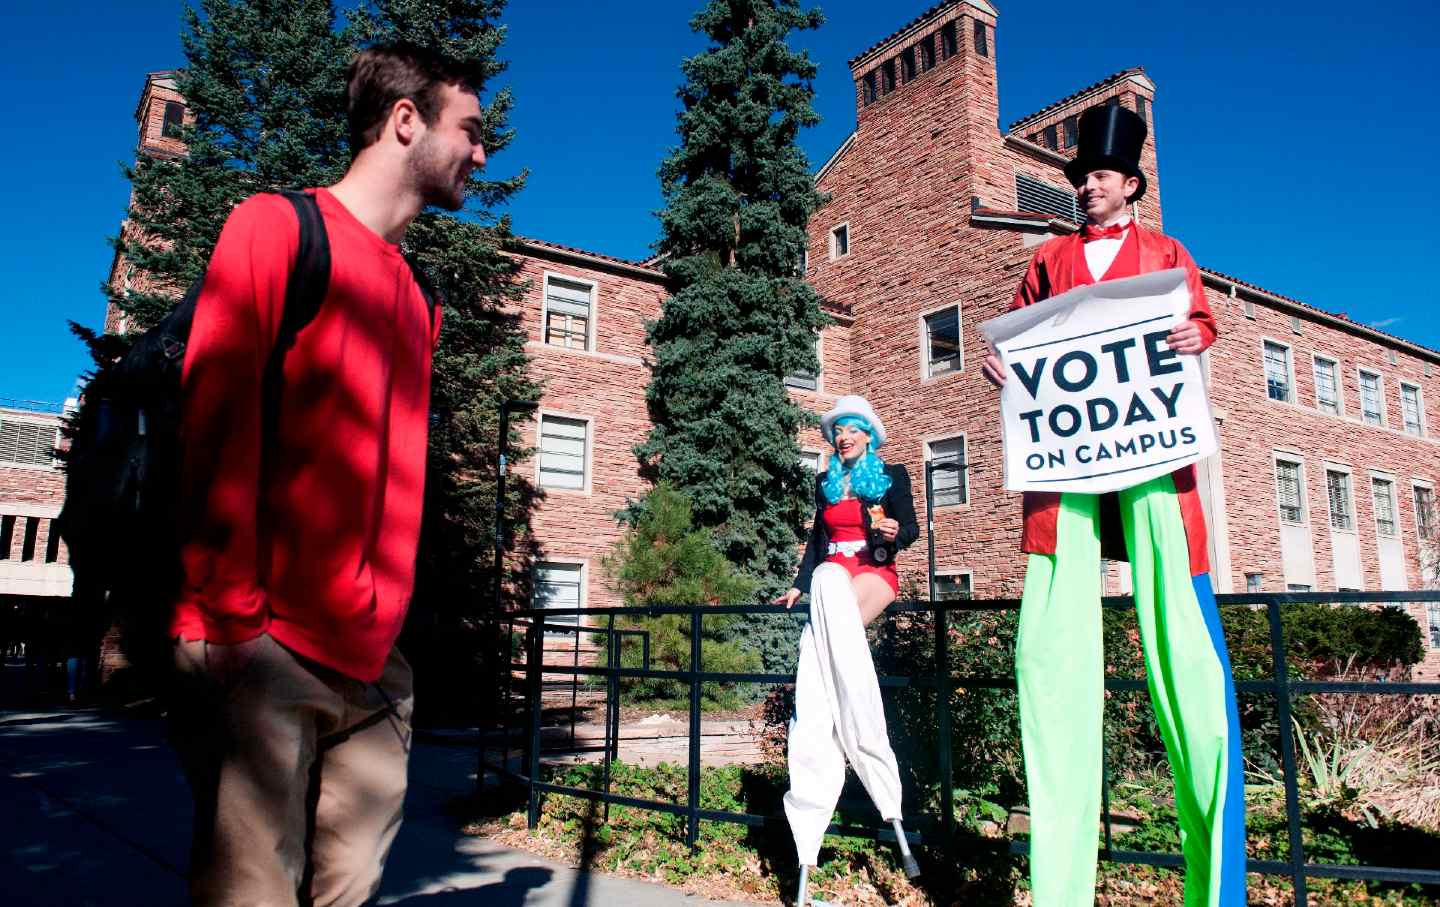 Student voting on campus